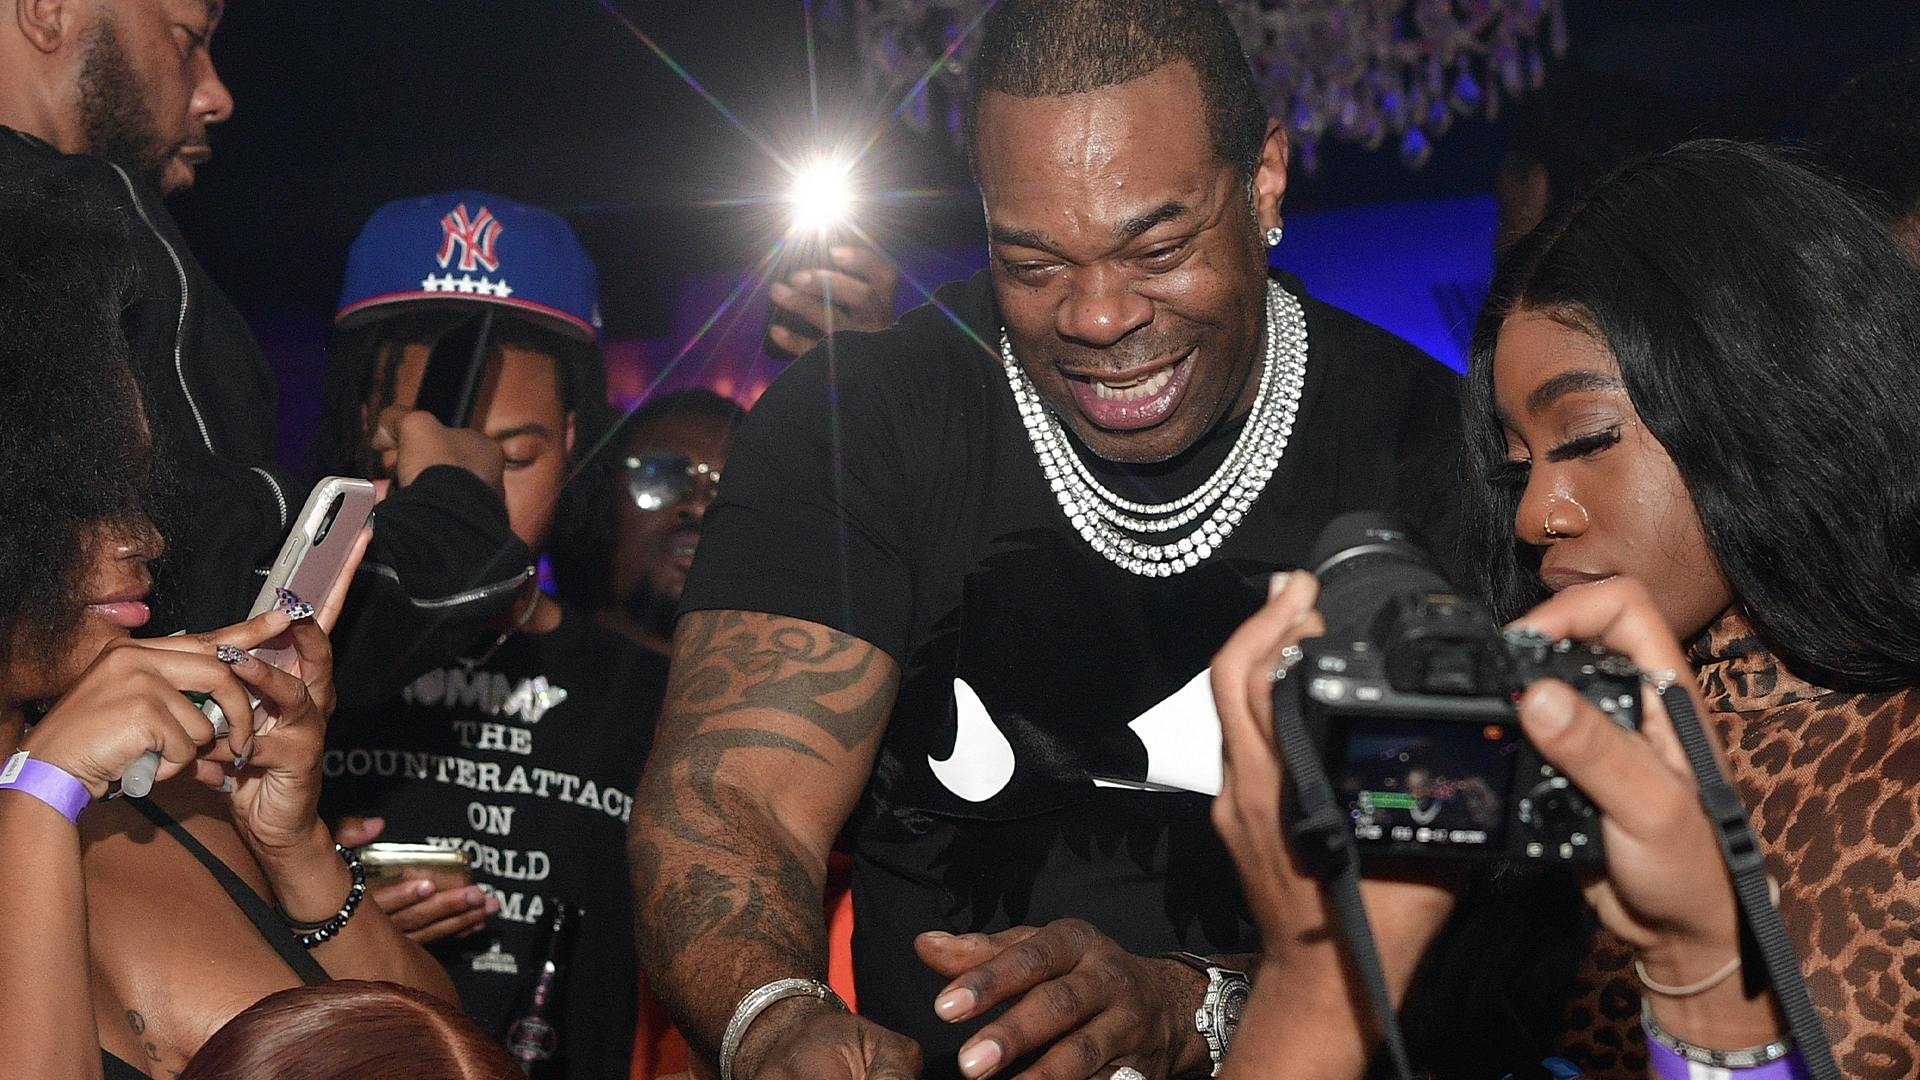  Rapper Busta Rhymes attends Hip Hop Vs Caribbean Vibes Event at Compound on October 9, 2020 in Atlanta, Georgia.